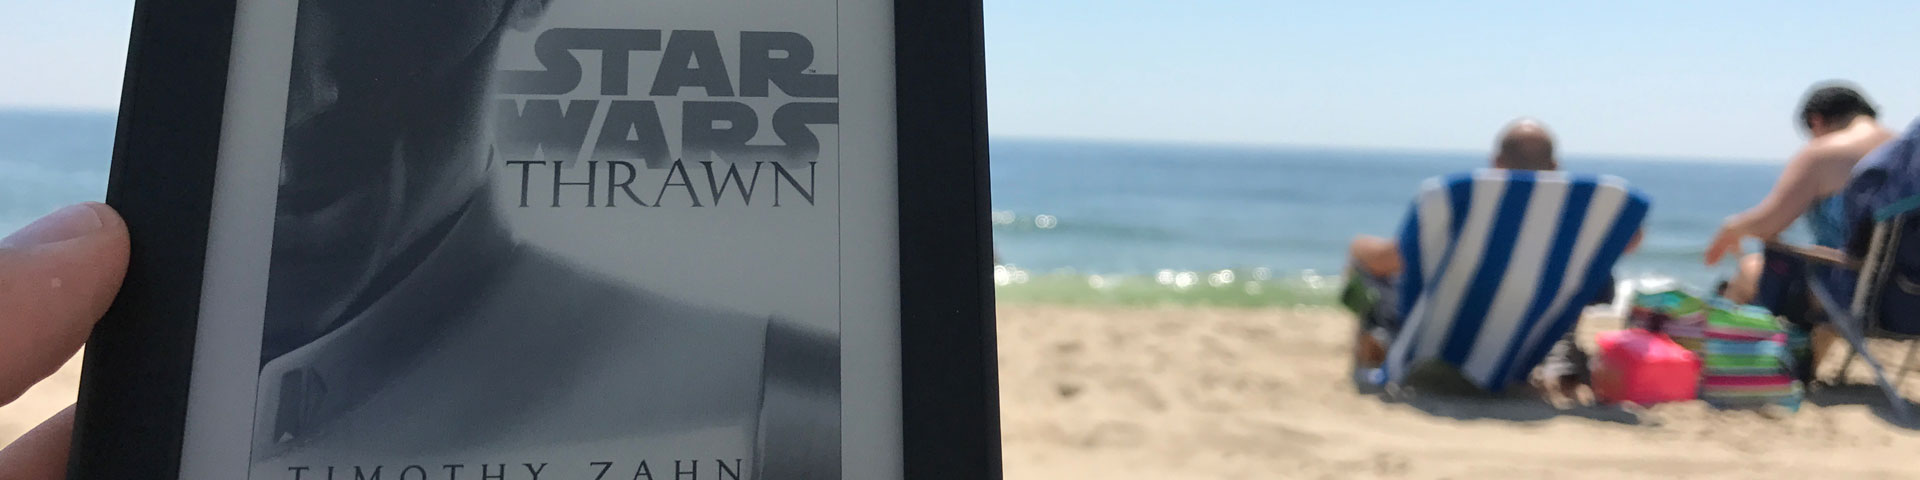 A photo of the Kindle cover for Thrawn, with the Jersey shore in the background.